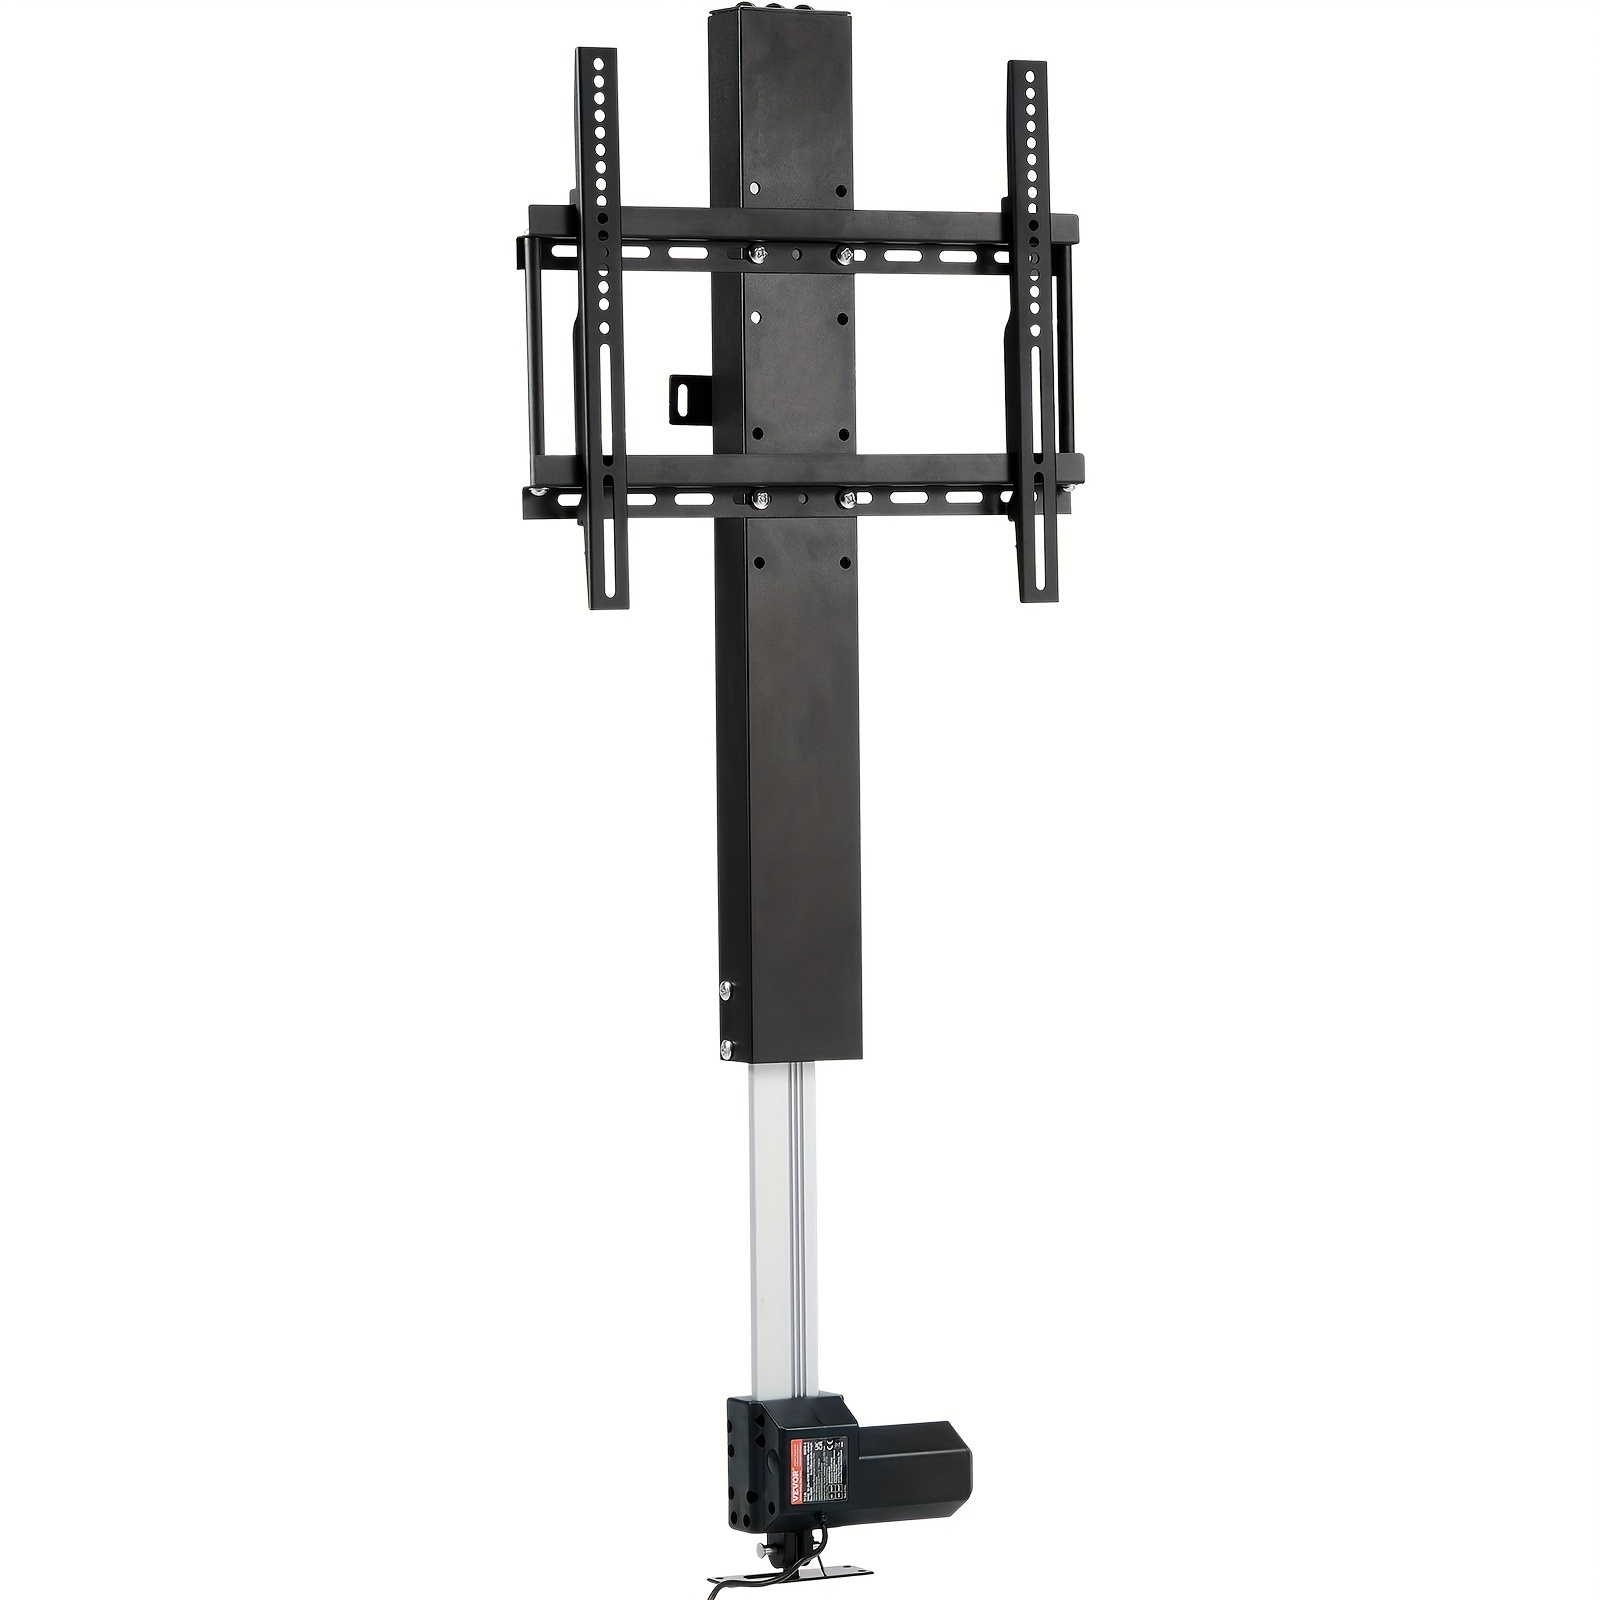 

Vevor Motorized Tv Lift Stroke Length 19.7 Inches Motorized Tv Mount Fit For Max.50 Inch Tv Lift With Remote Control Height Adjustable 38-65 Inch, Load Capacity 132 Lbs